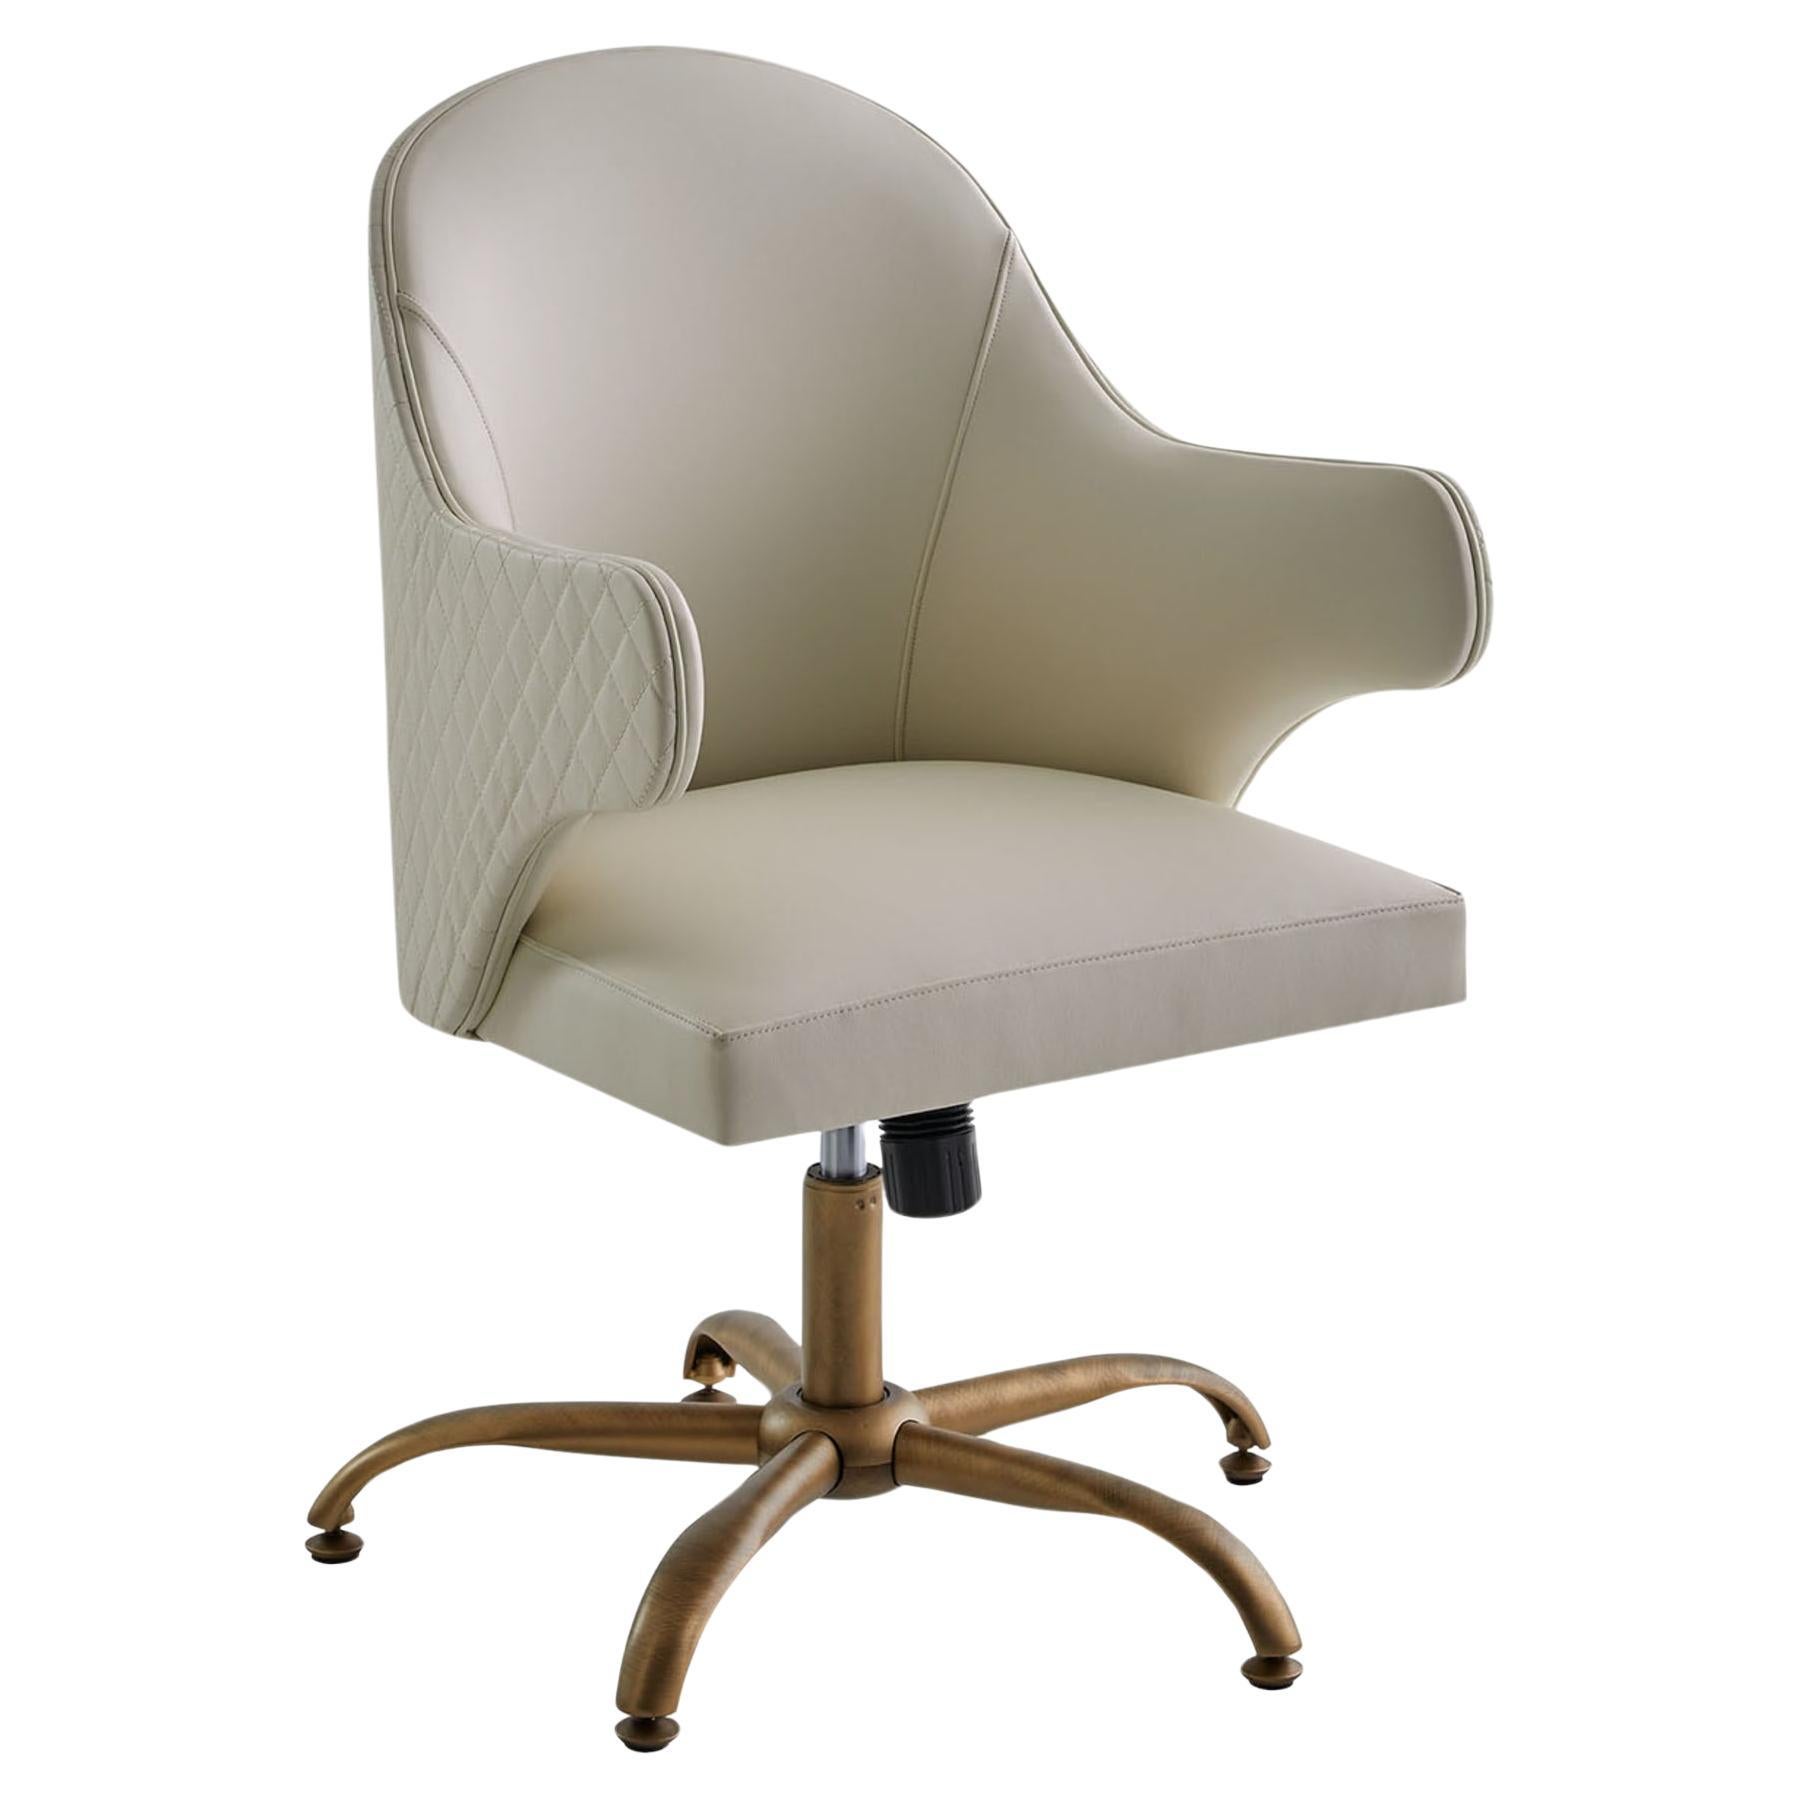 Soft White Swivel Chair For Sale